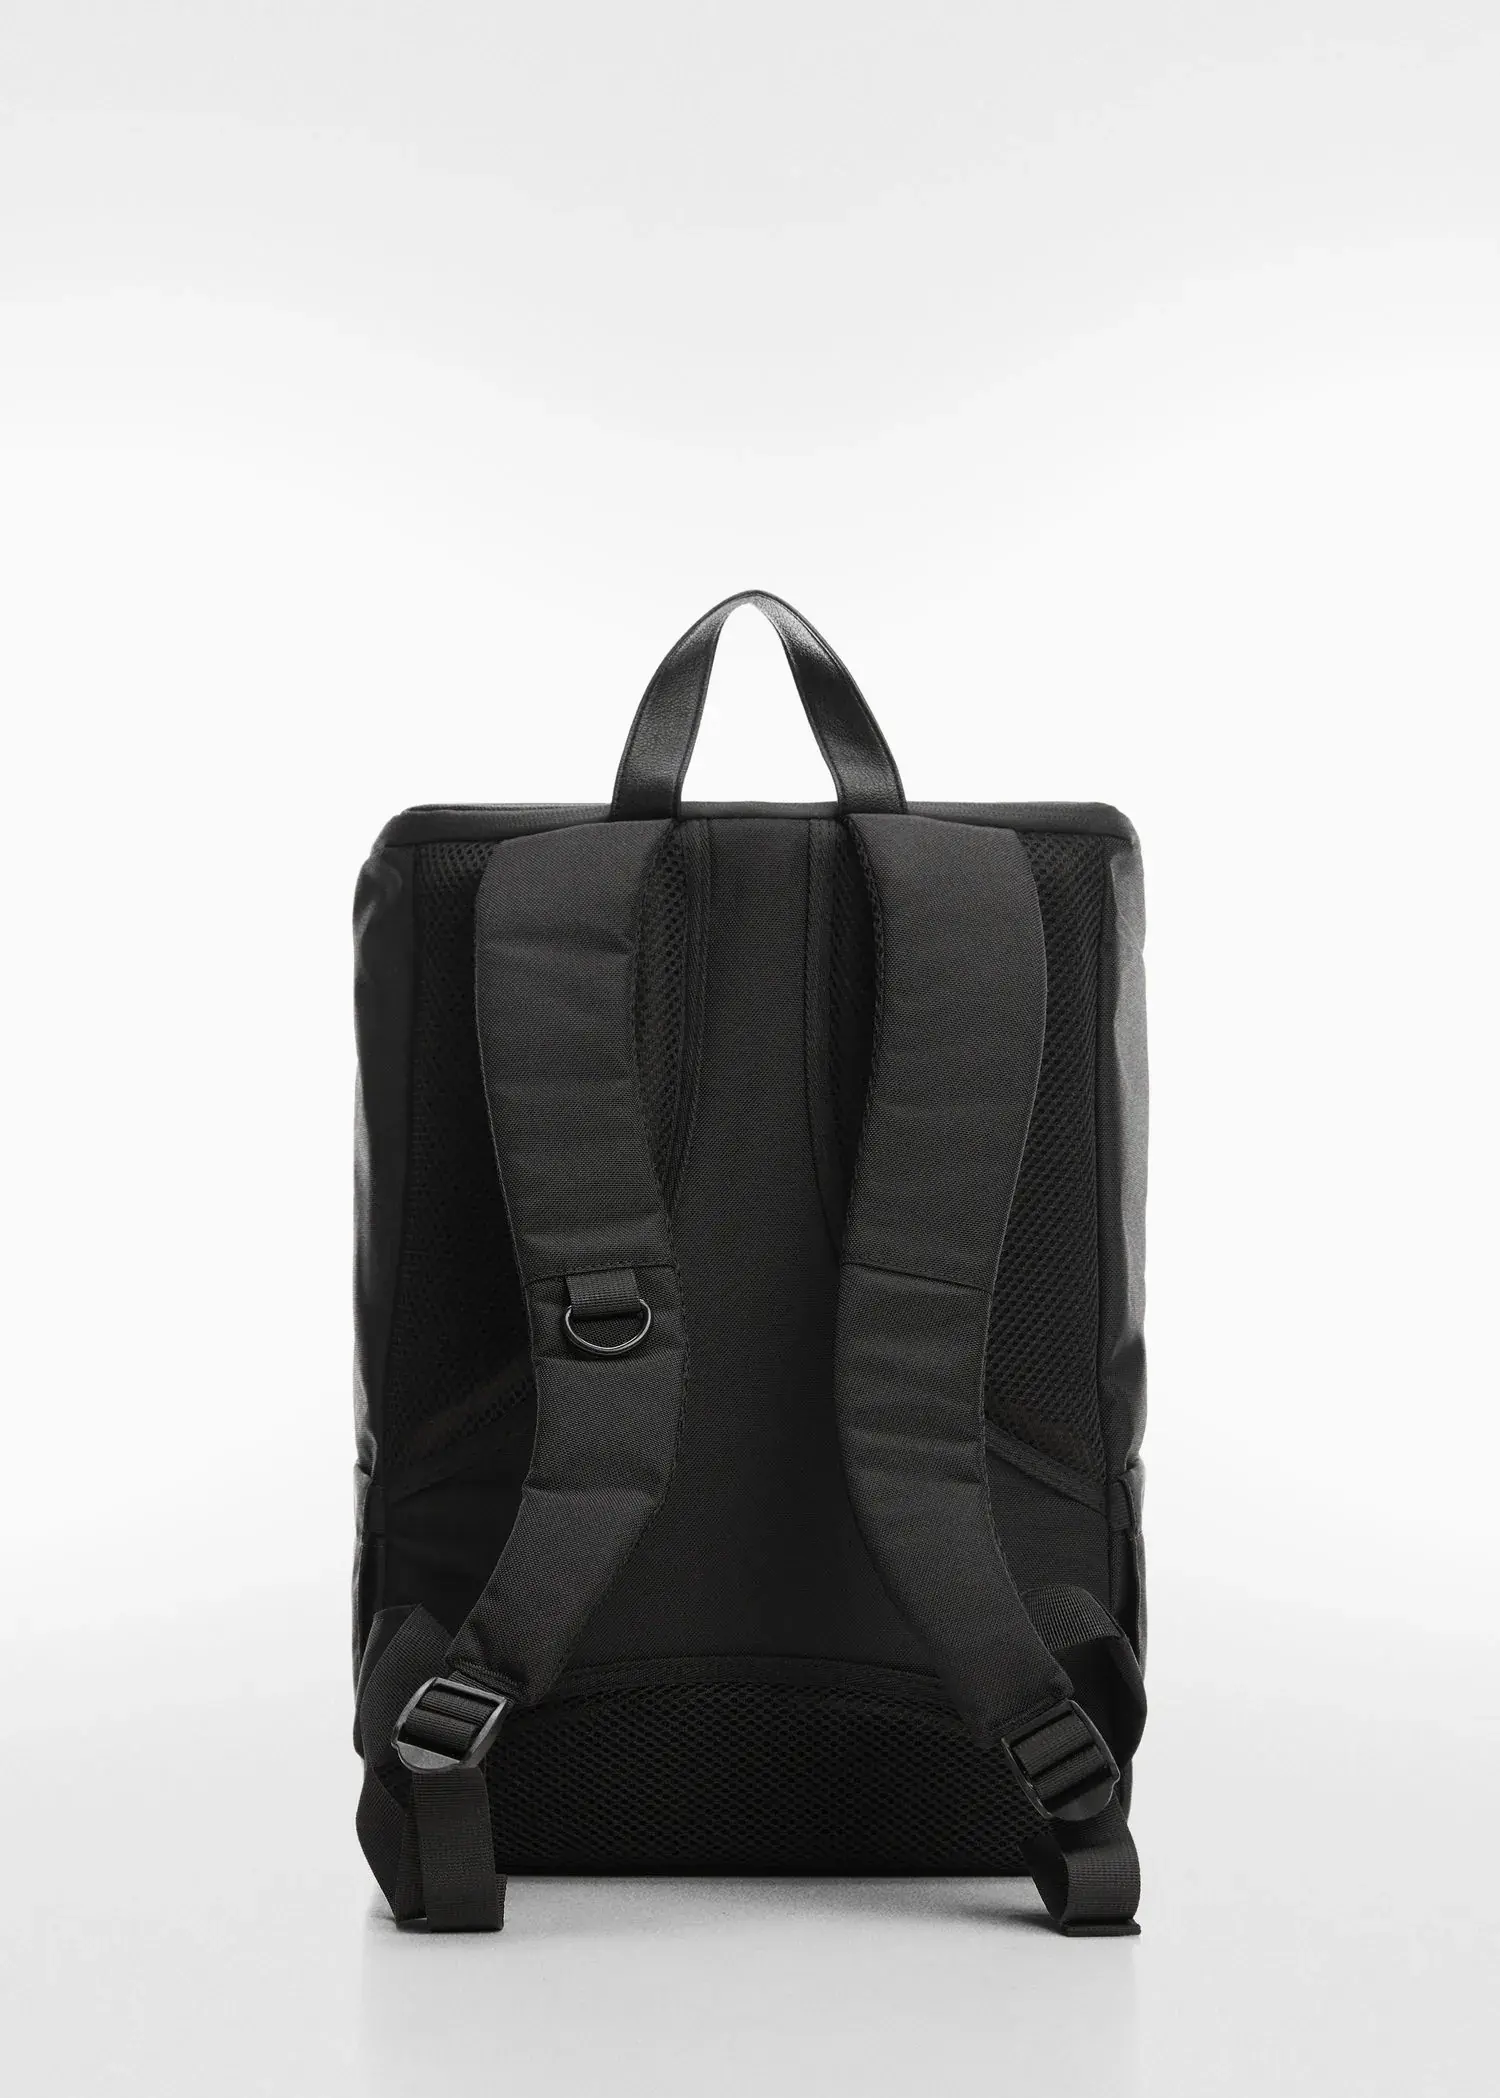 Mango Backpack with leather-effect details. 3